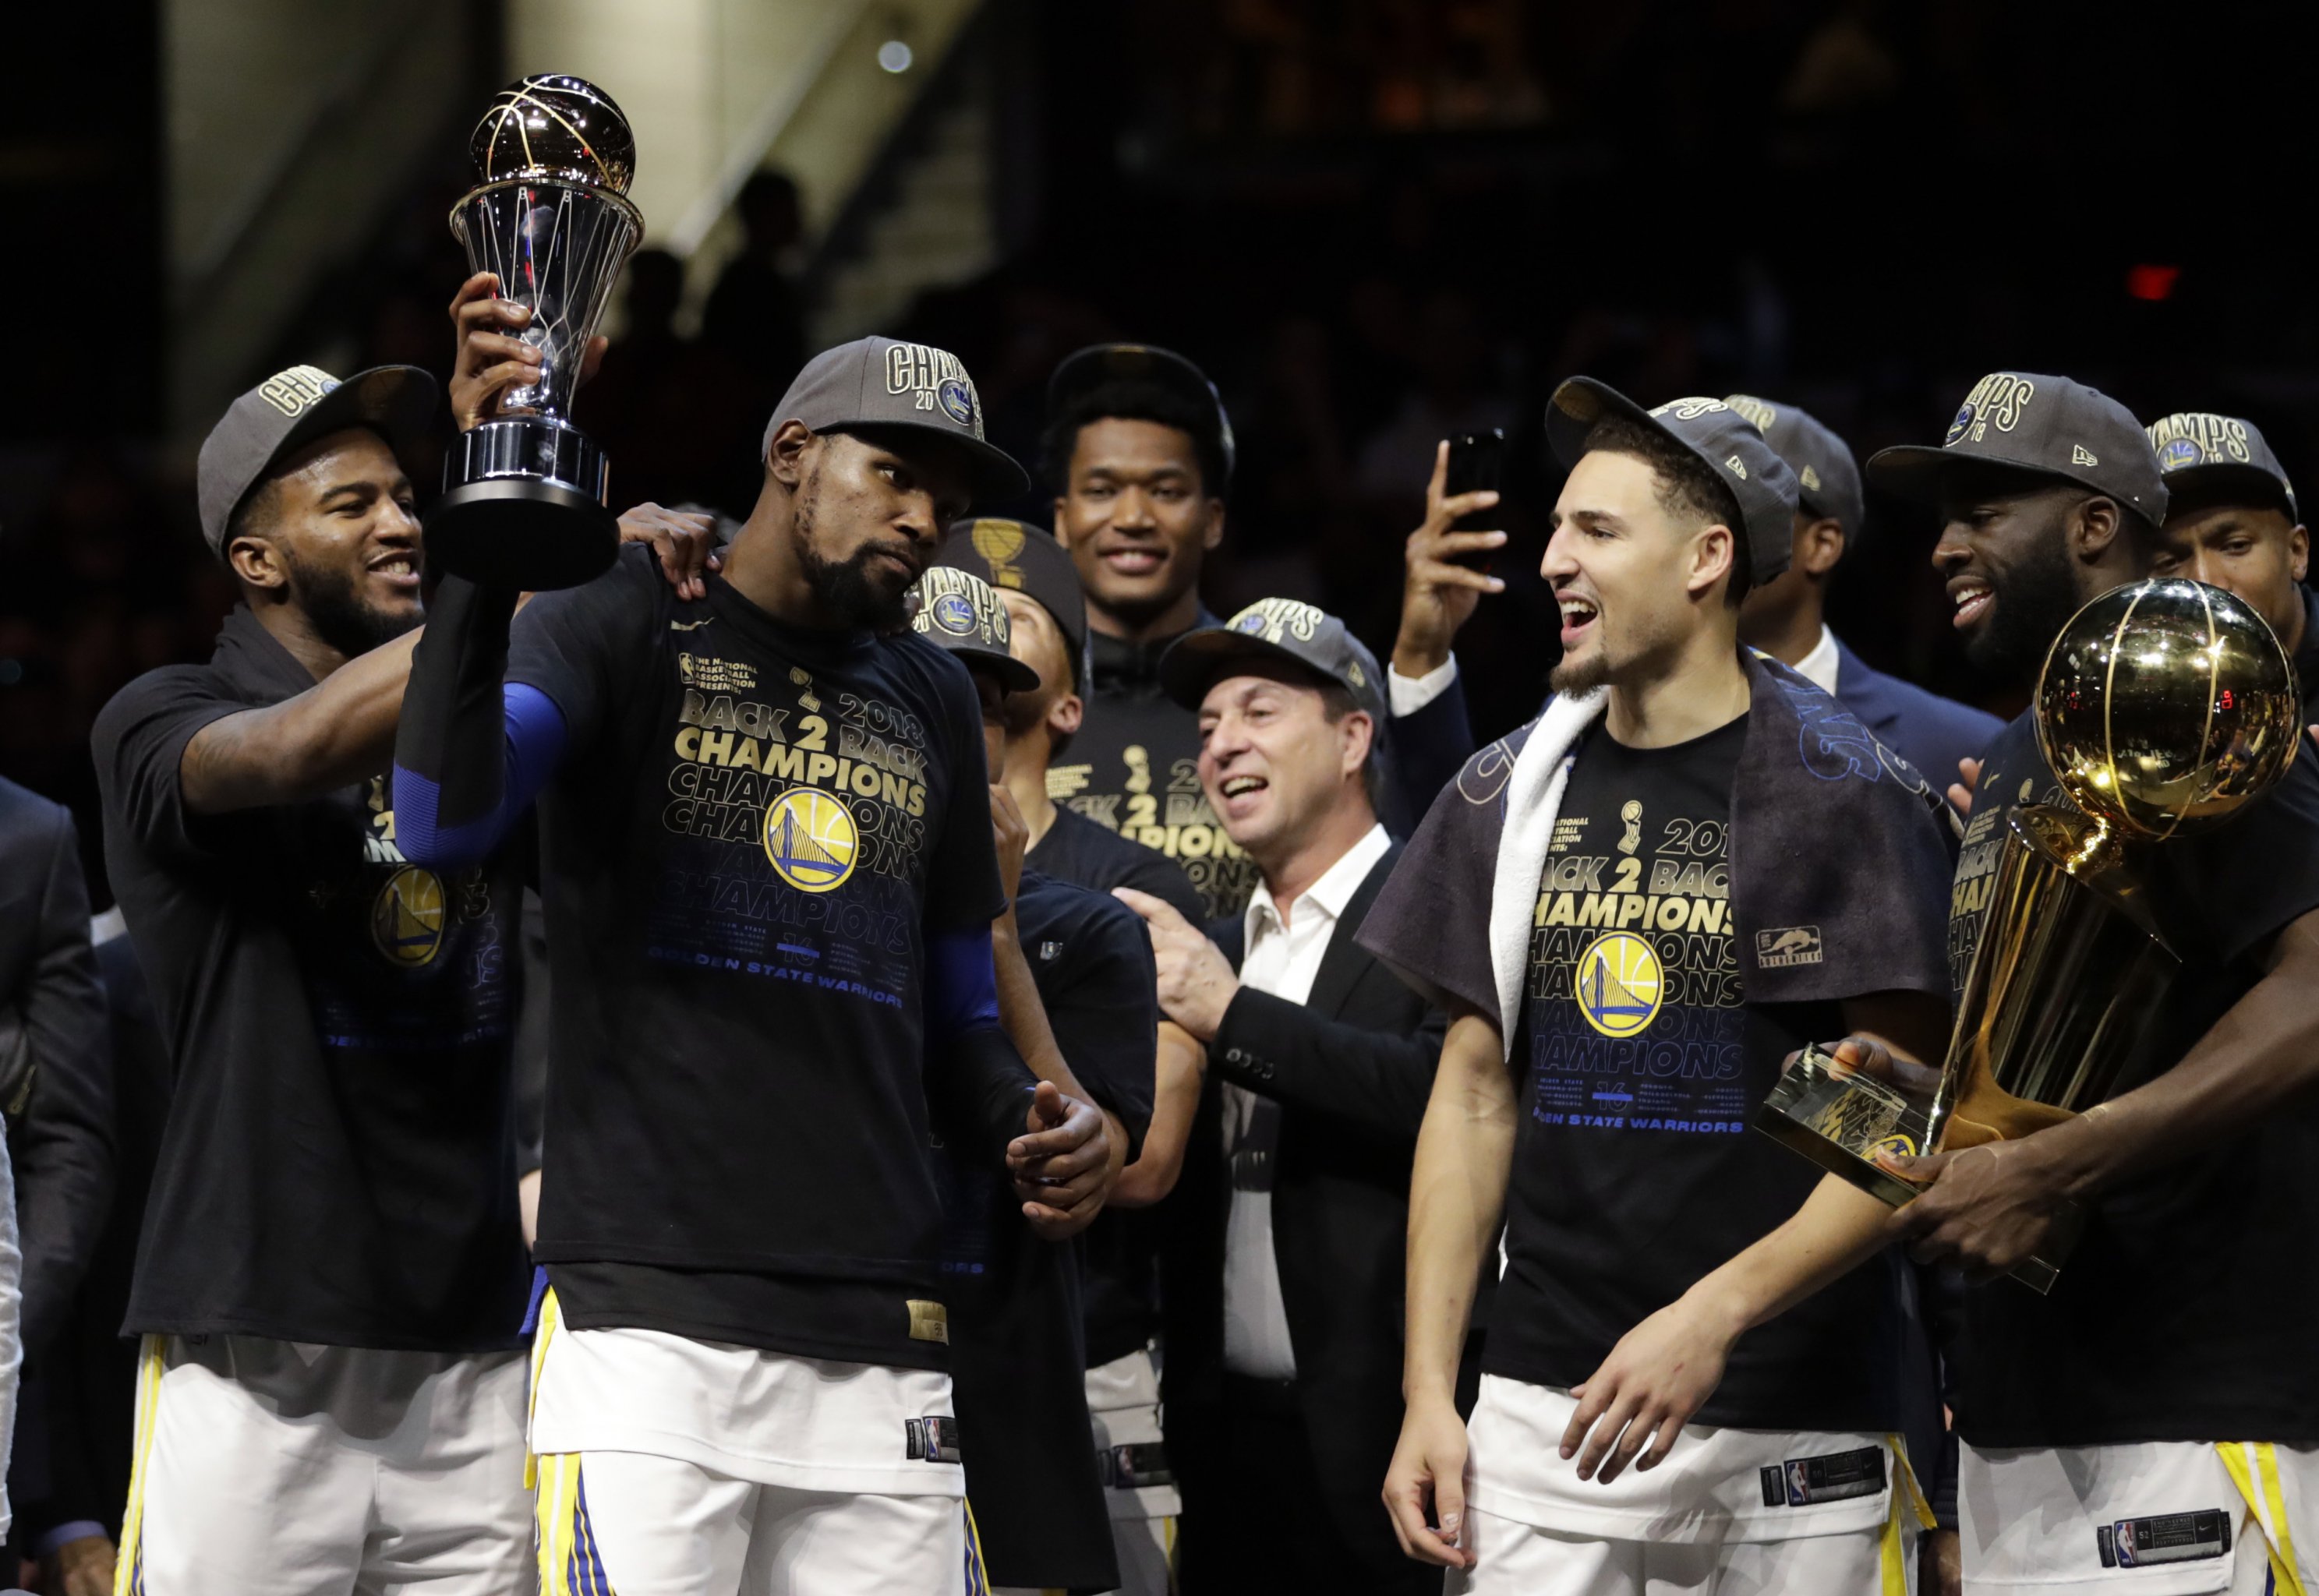 Warriors Pres Said There 'Wasn't Joy' in 2018 NBA Title, KD Disagrees